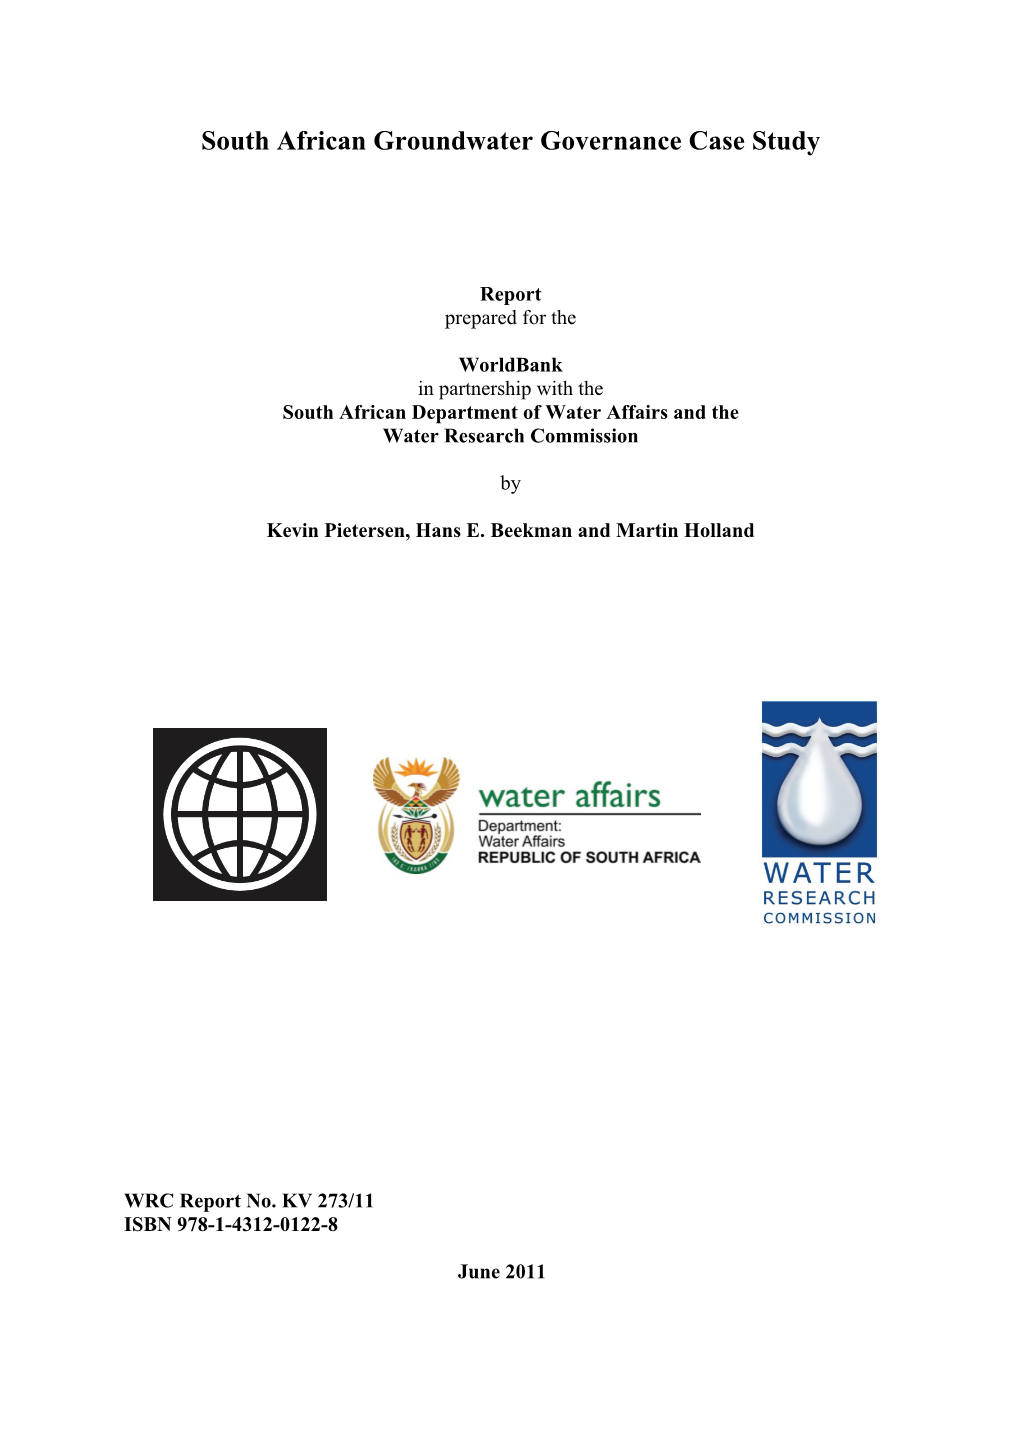 South Africa Groundwater Governance